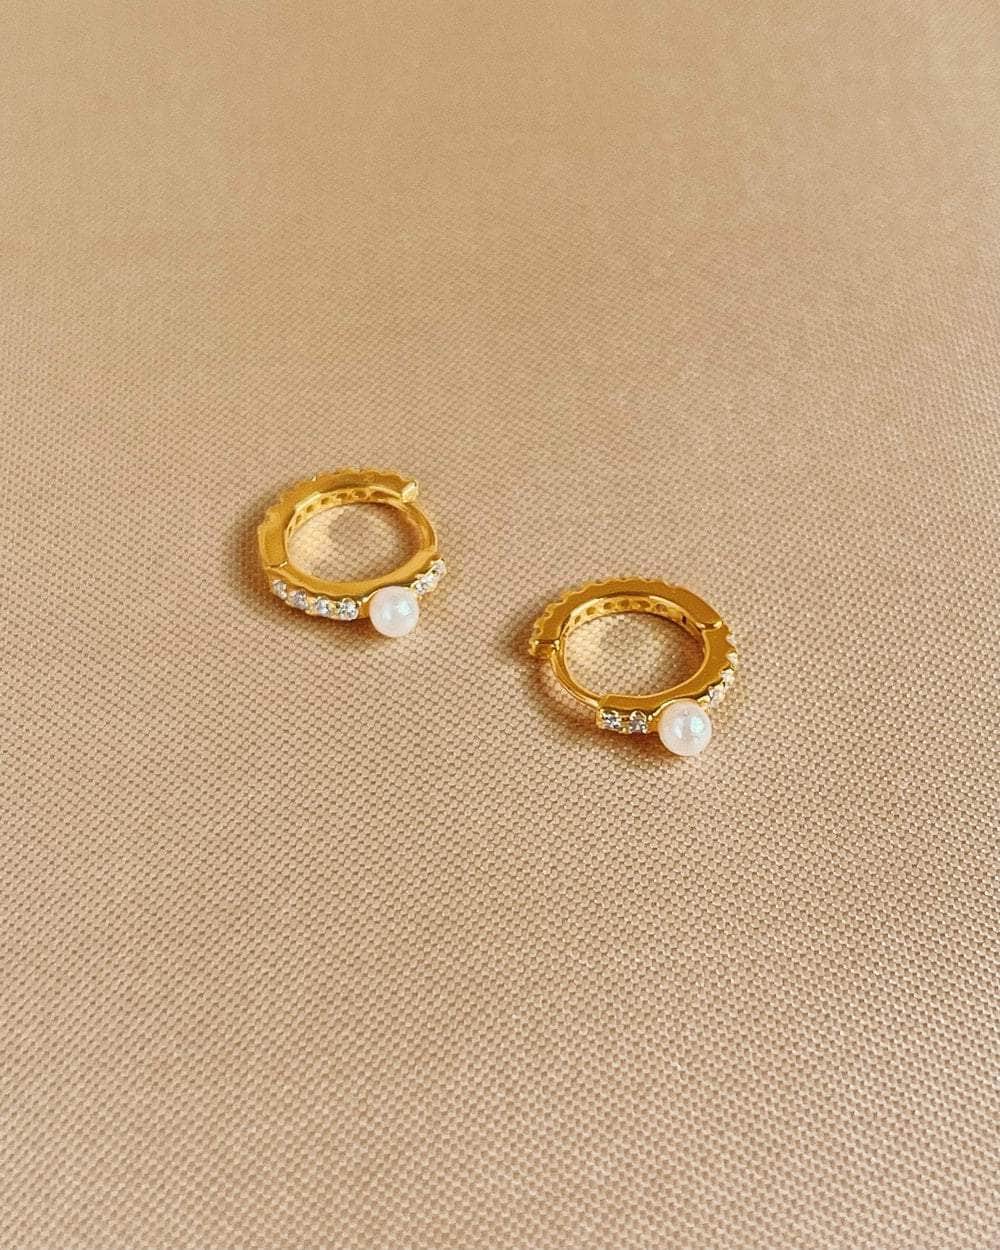 So Dainty Co. Huggies / Hoops Myla Gold Huggies Gold Plated 925 Sterling Silver Jewelry